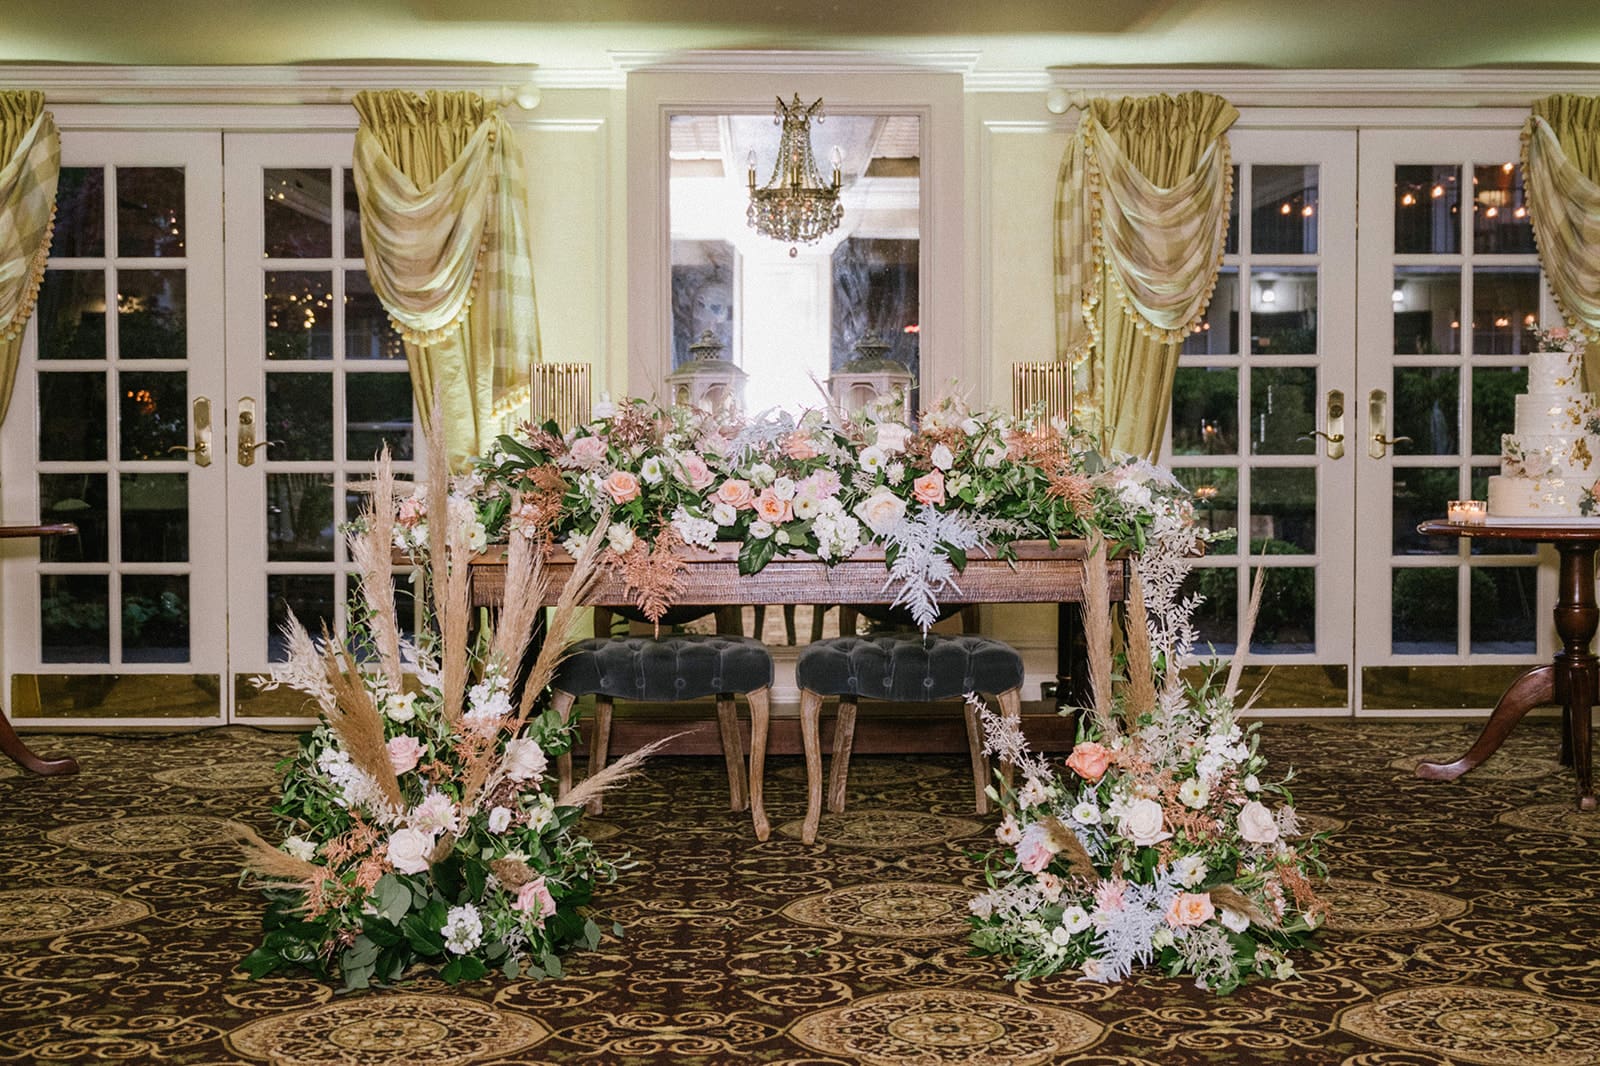 A wedding table set up with flowers and flowers.